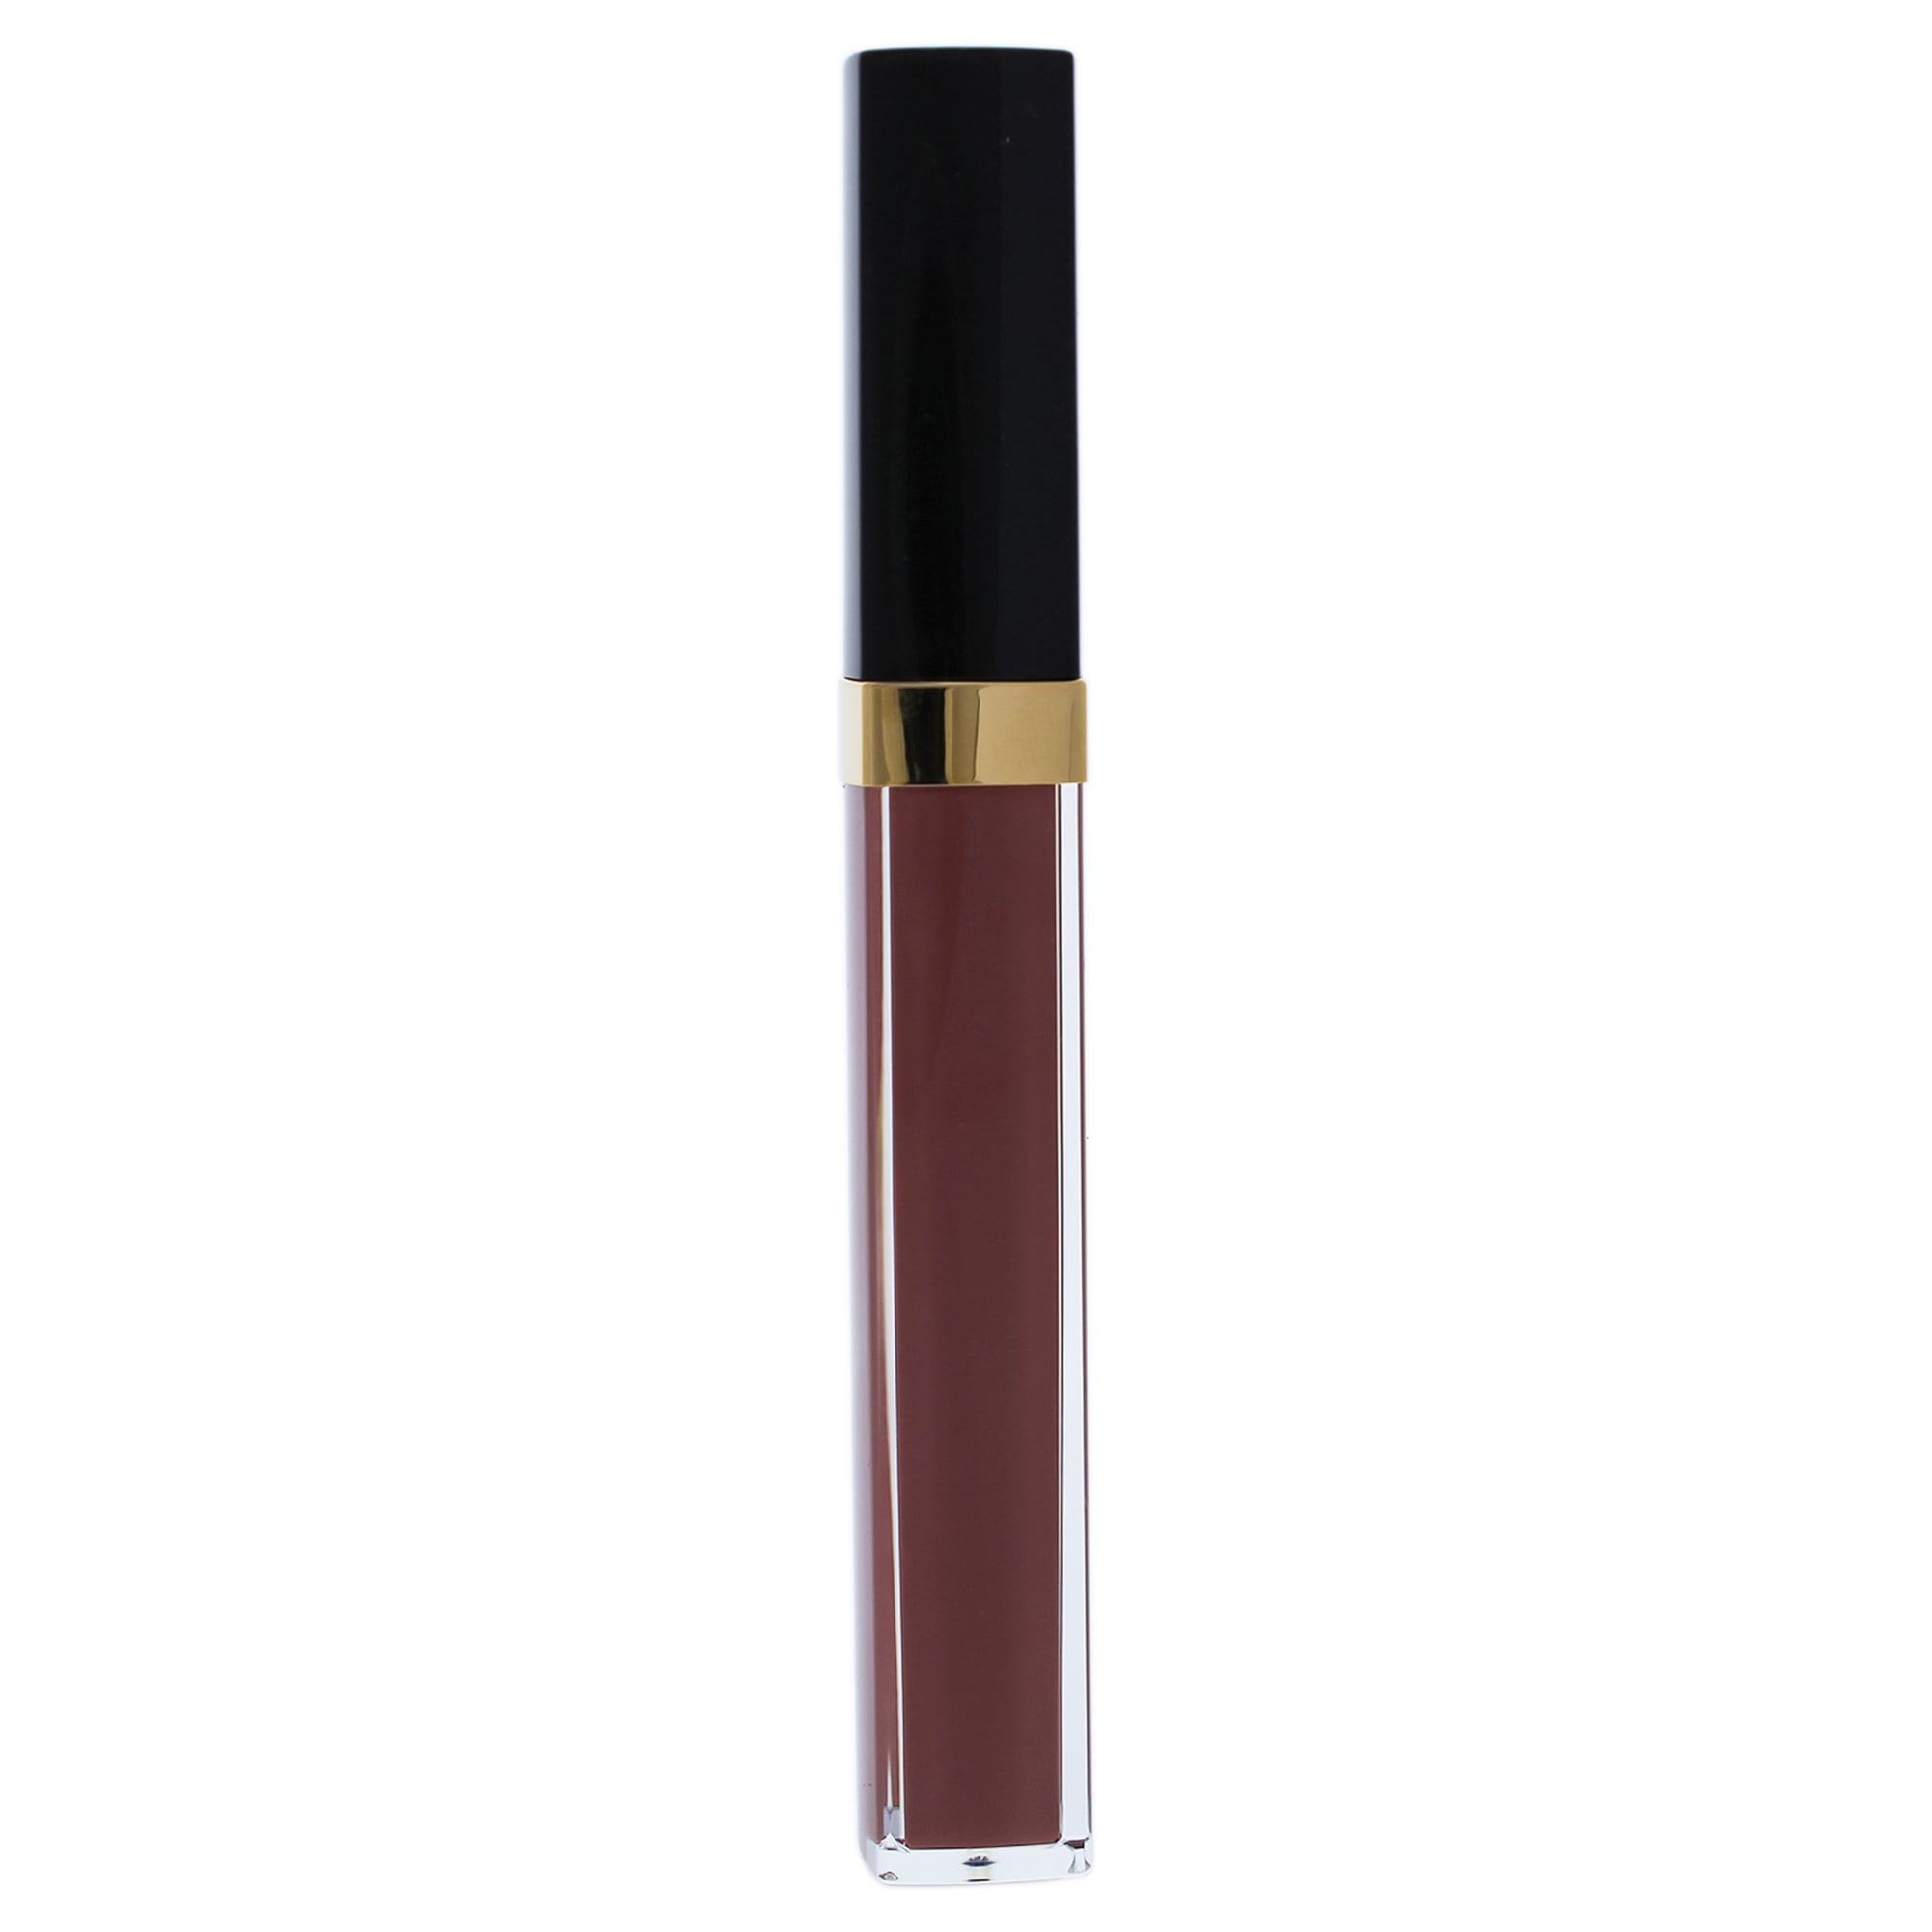 Amazoncojp CHANEL ROUGE COCO GLOSS Rouge Coco Gloss Lip Gloss Shop Bag  Included 24 Colors Caramel 716  Beauty